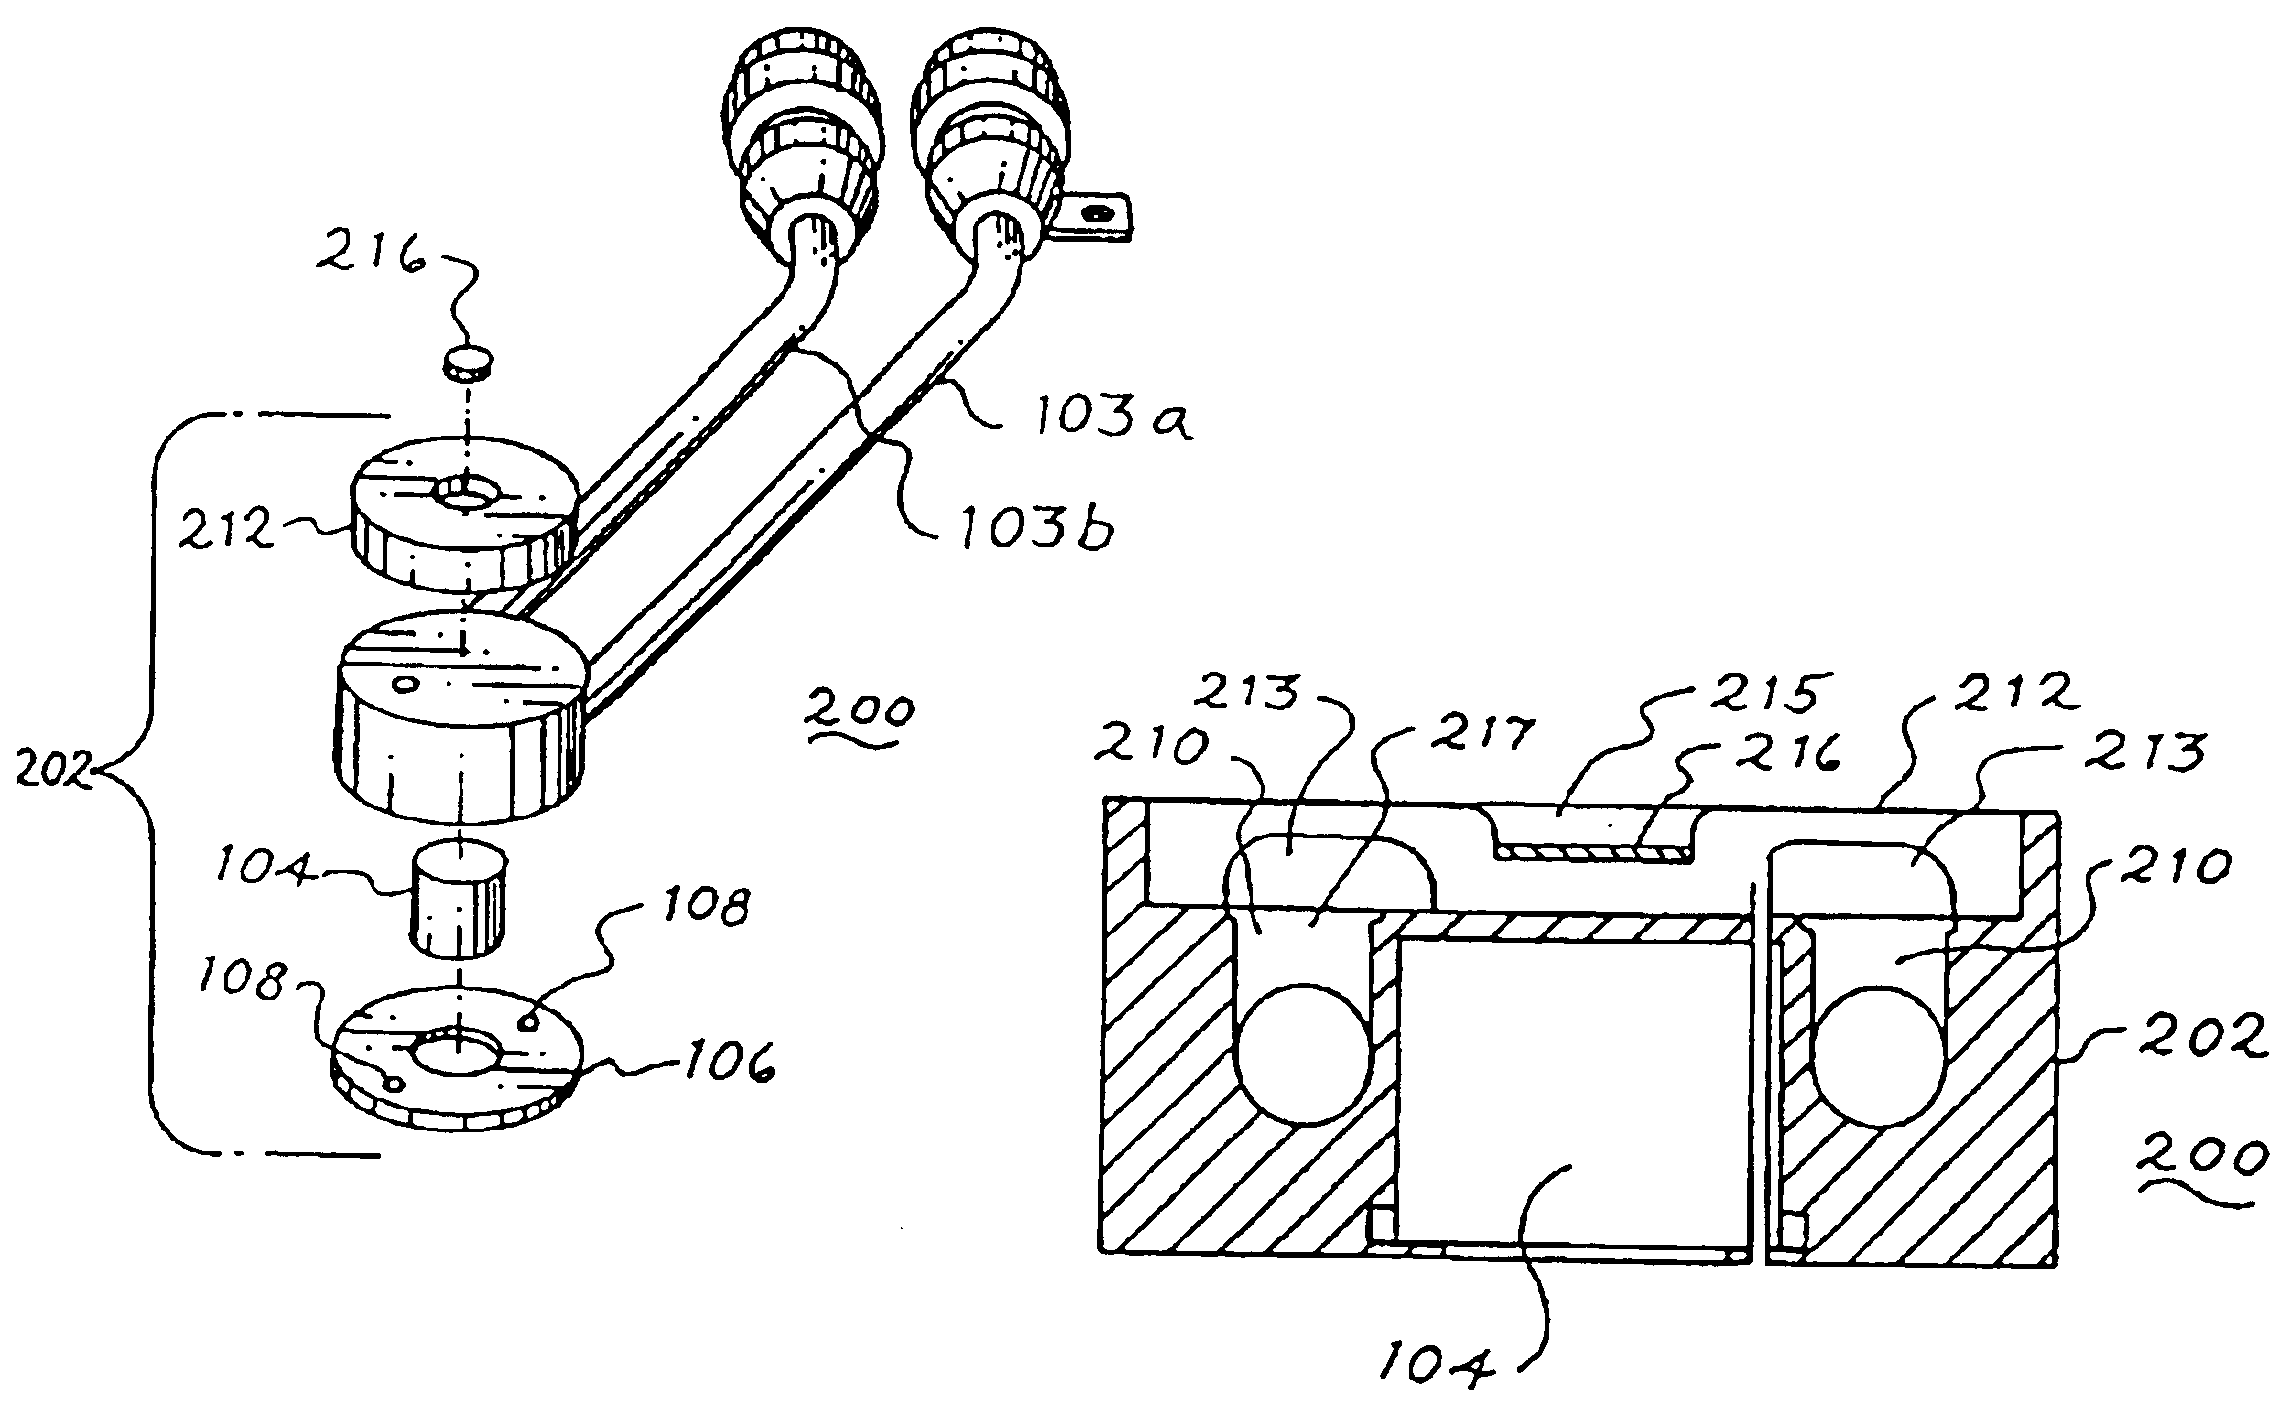 Tungsten composite x-ray target assembly for radiation therapy